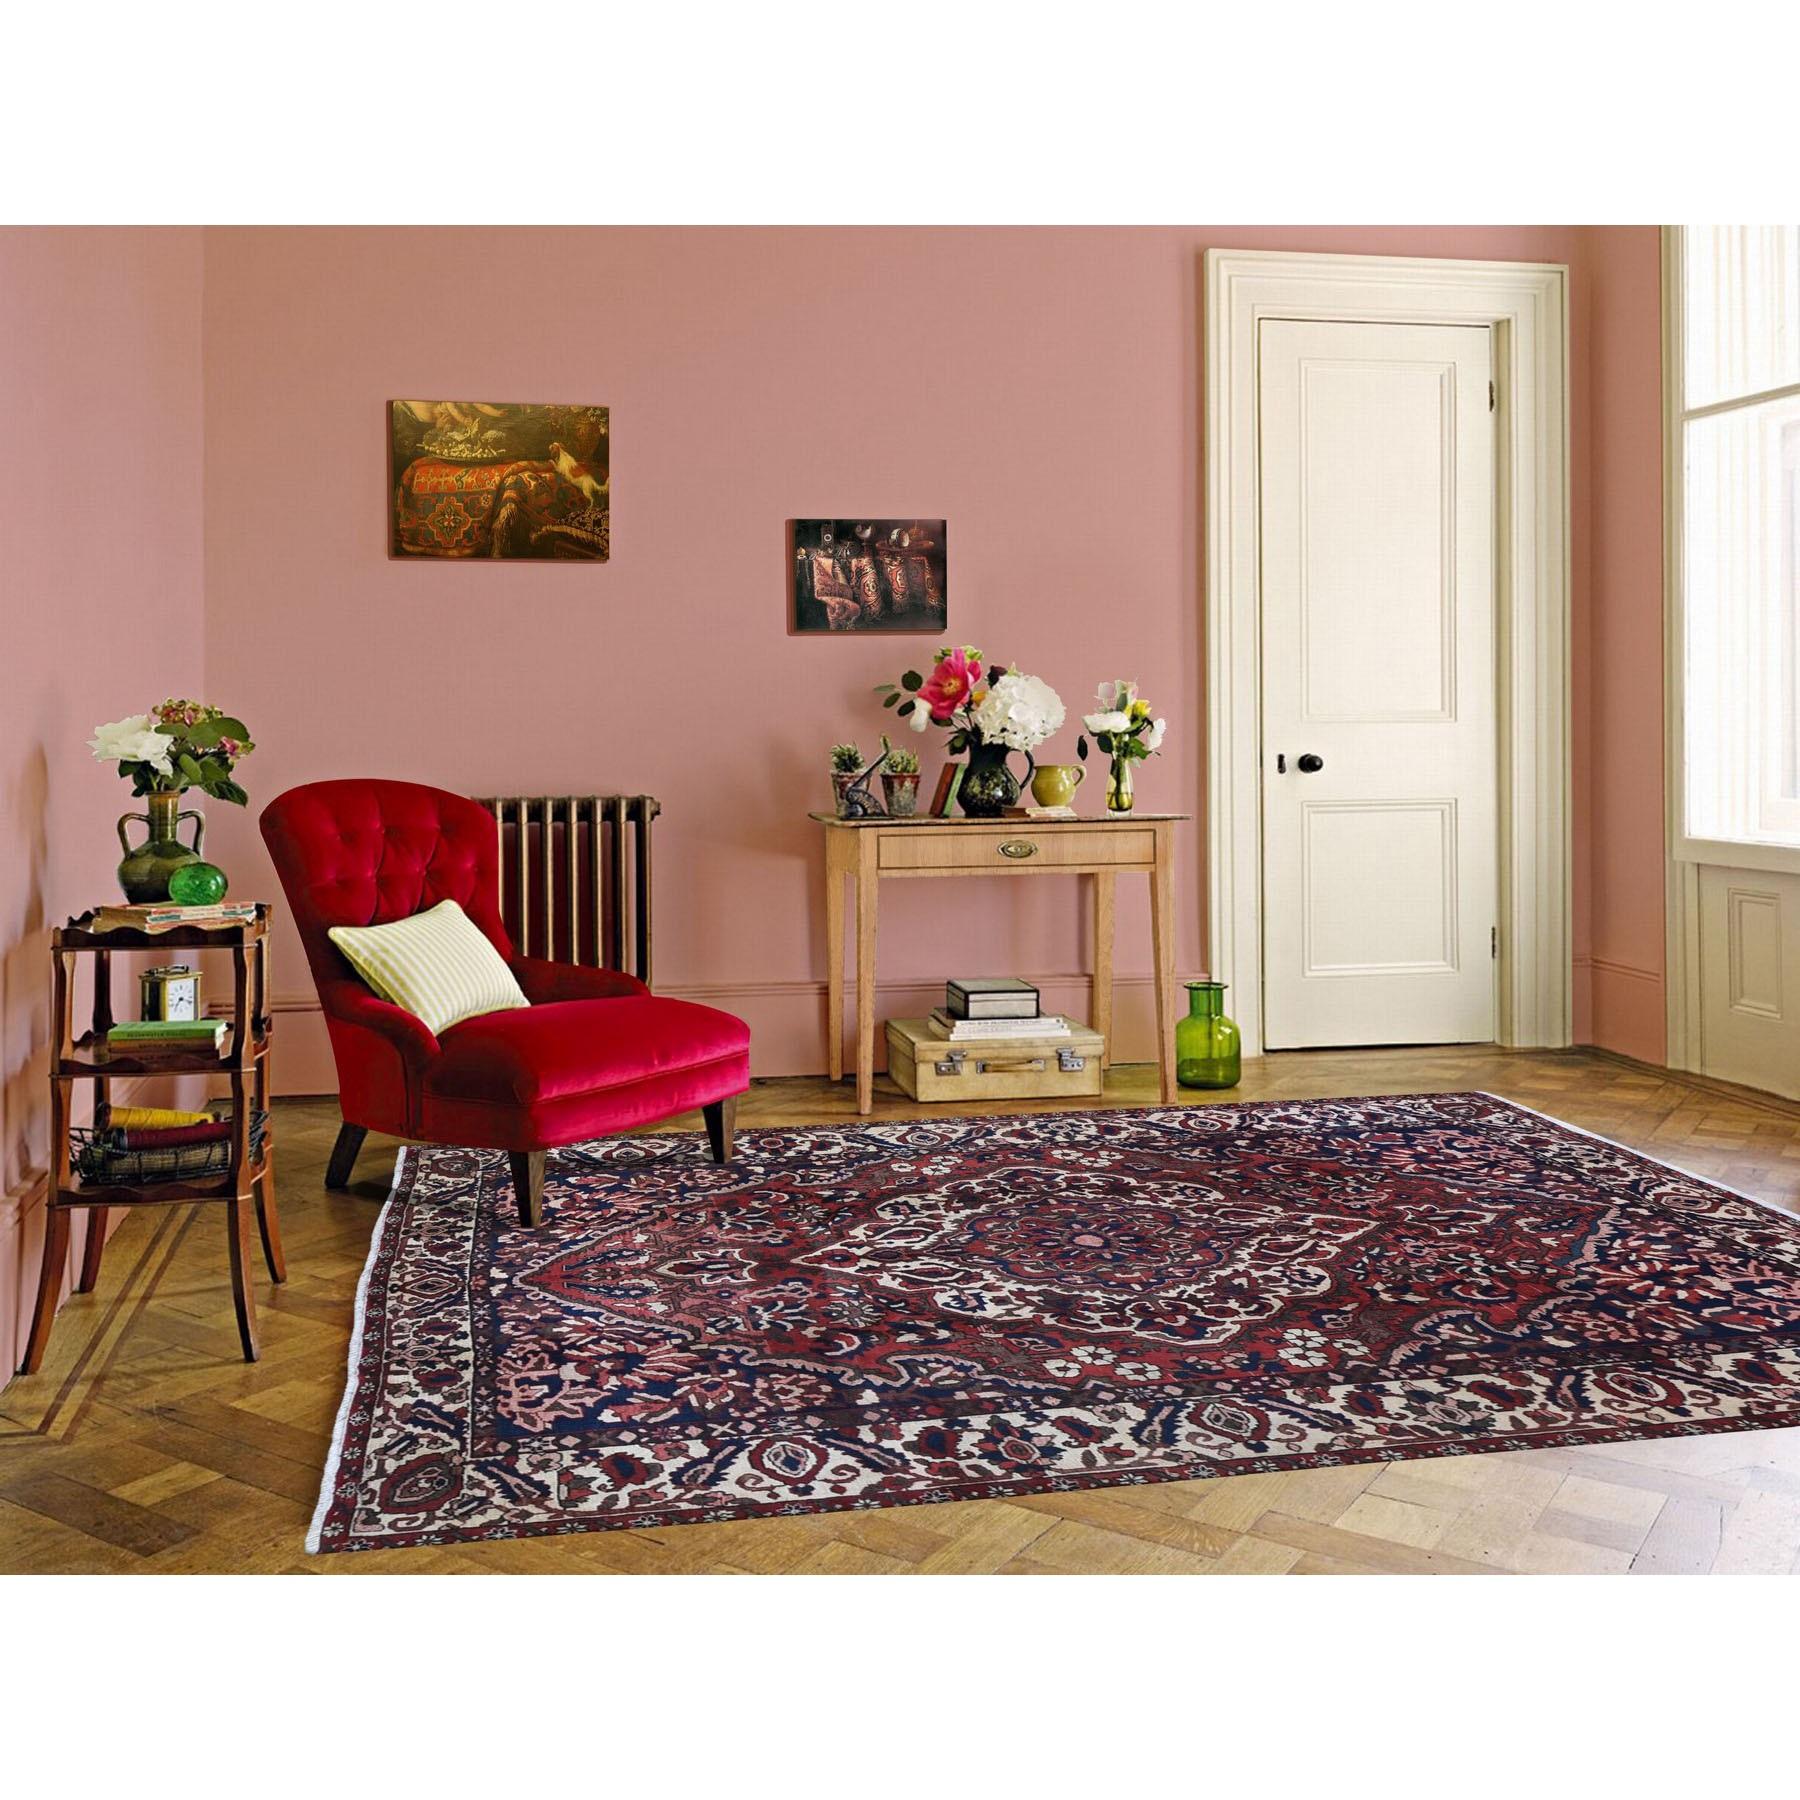 This fabulous hand-knotted carpet has been created and designed for extra strength and durability. This rug has been handcrafted for weeks in the traditional method that is used to make
Exact Rug Size in Feet and Inches : 7'0